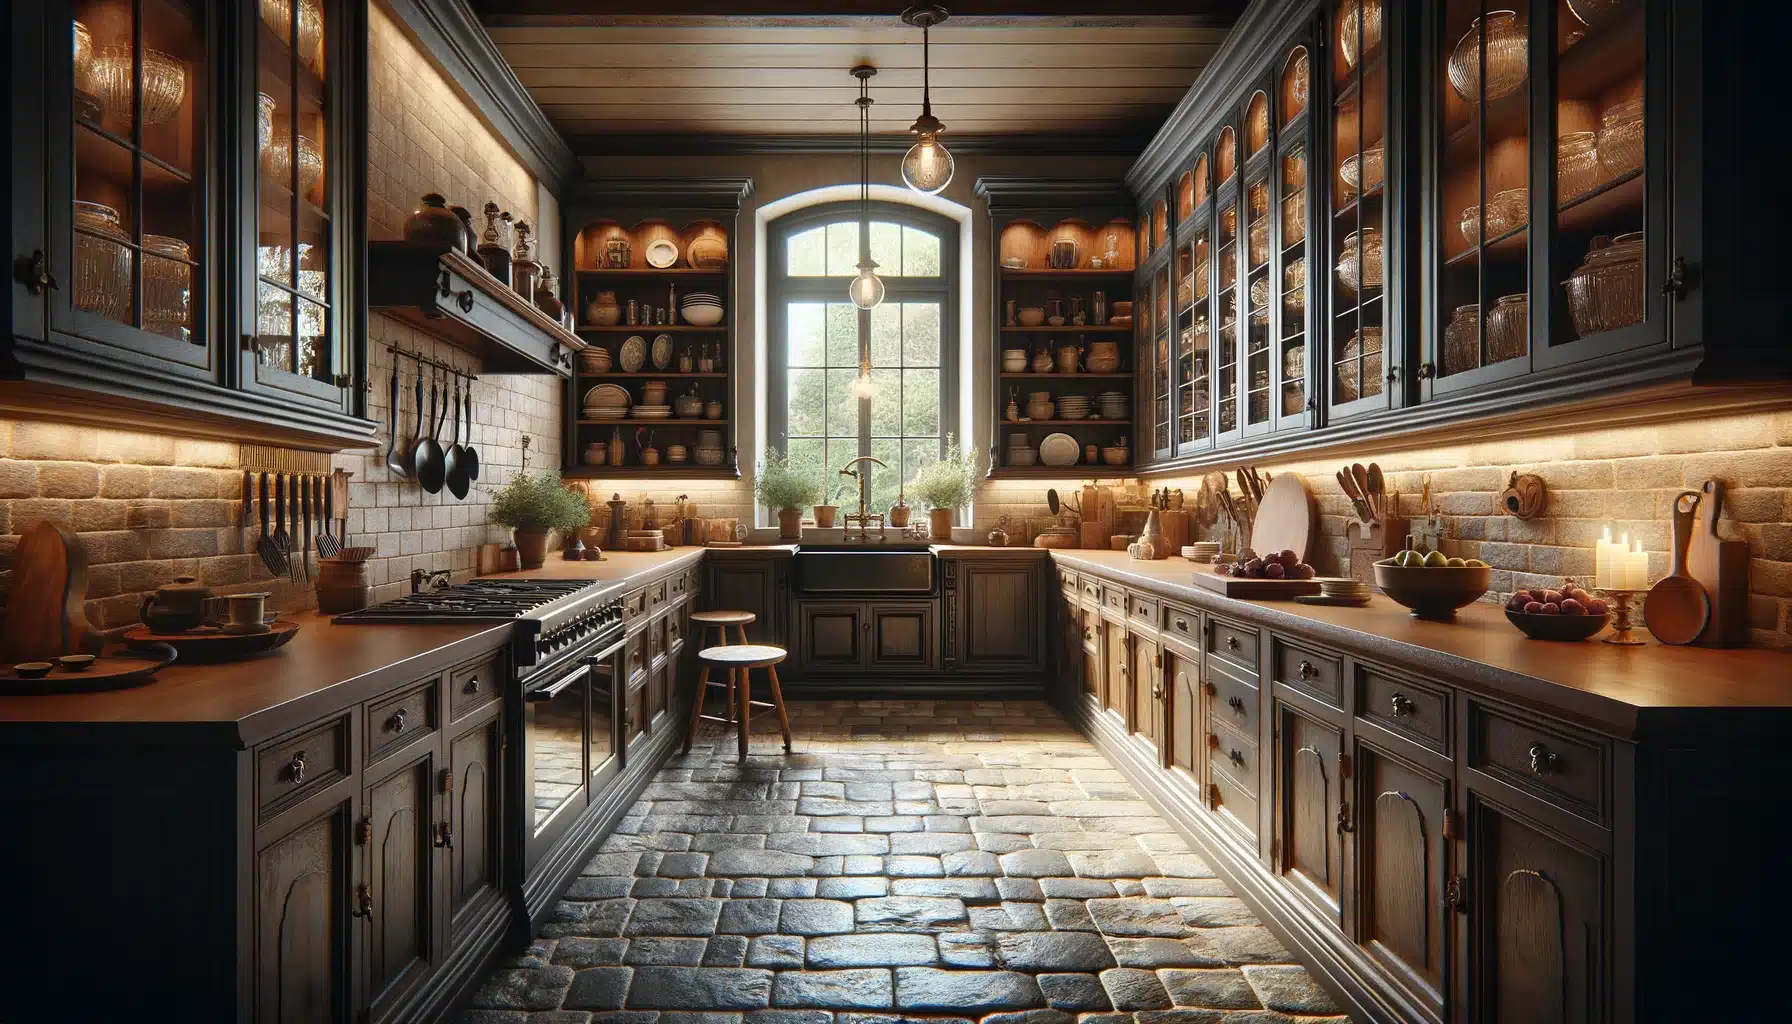 25 Brilliant Galley Kitchen Design Ideas for Every Style